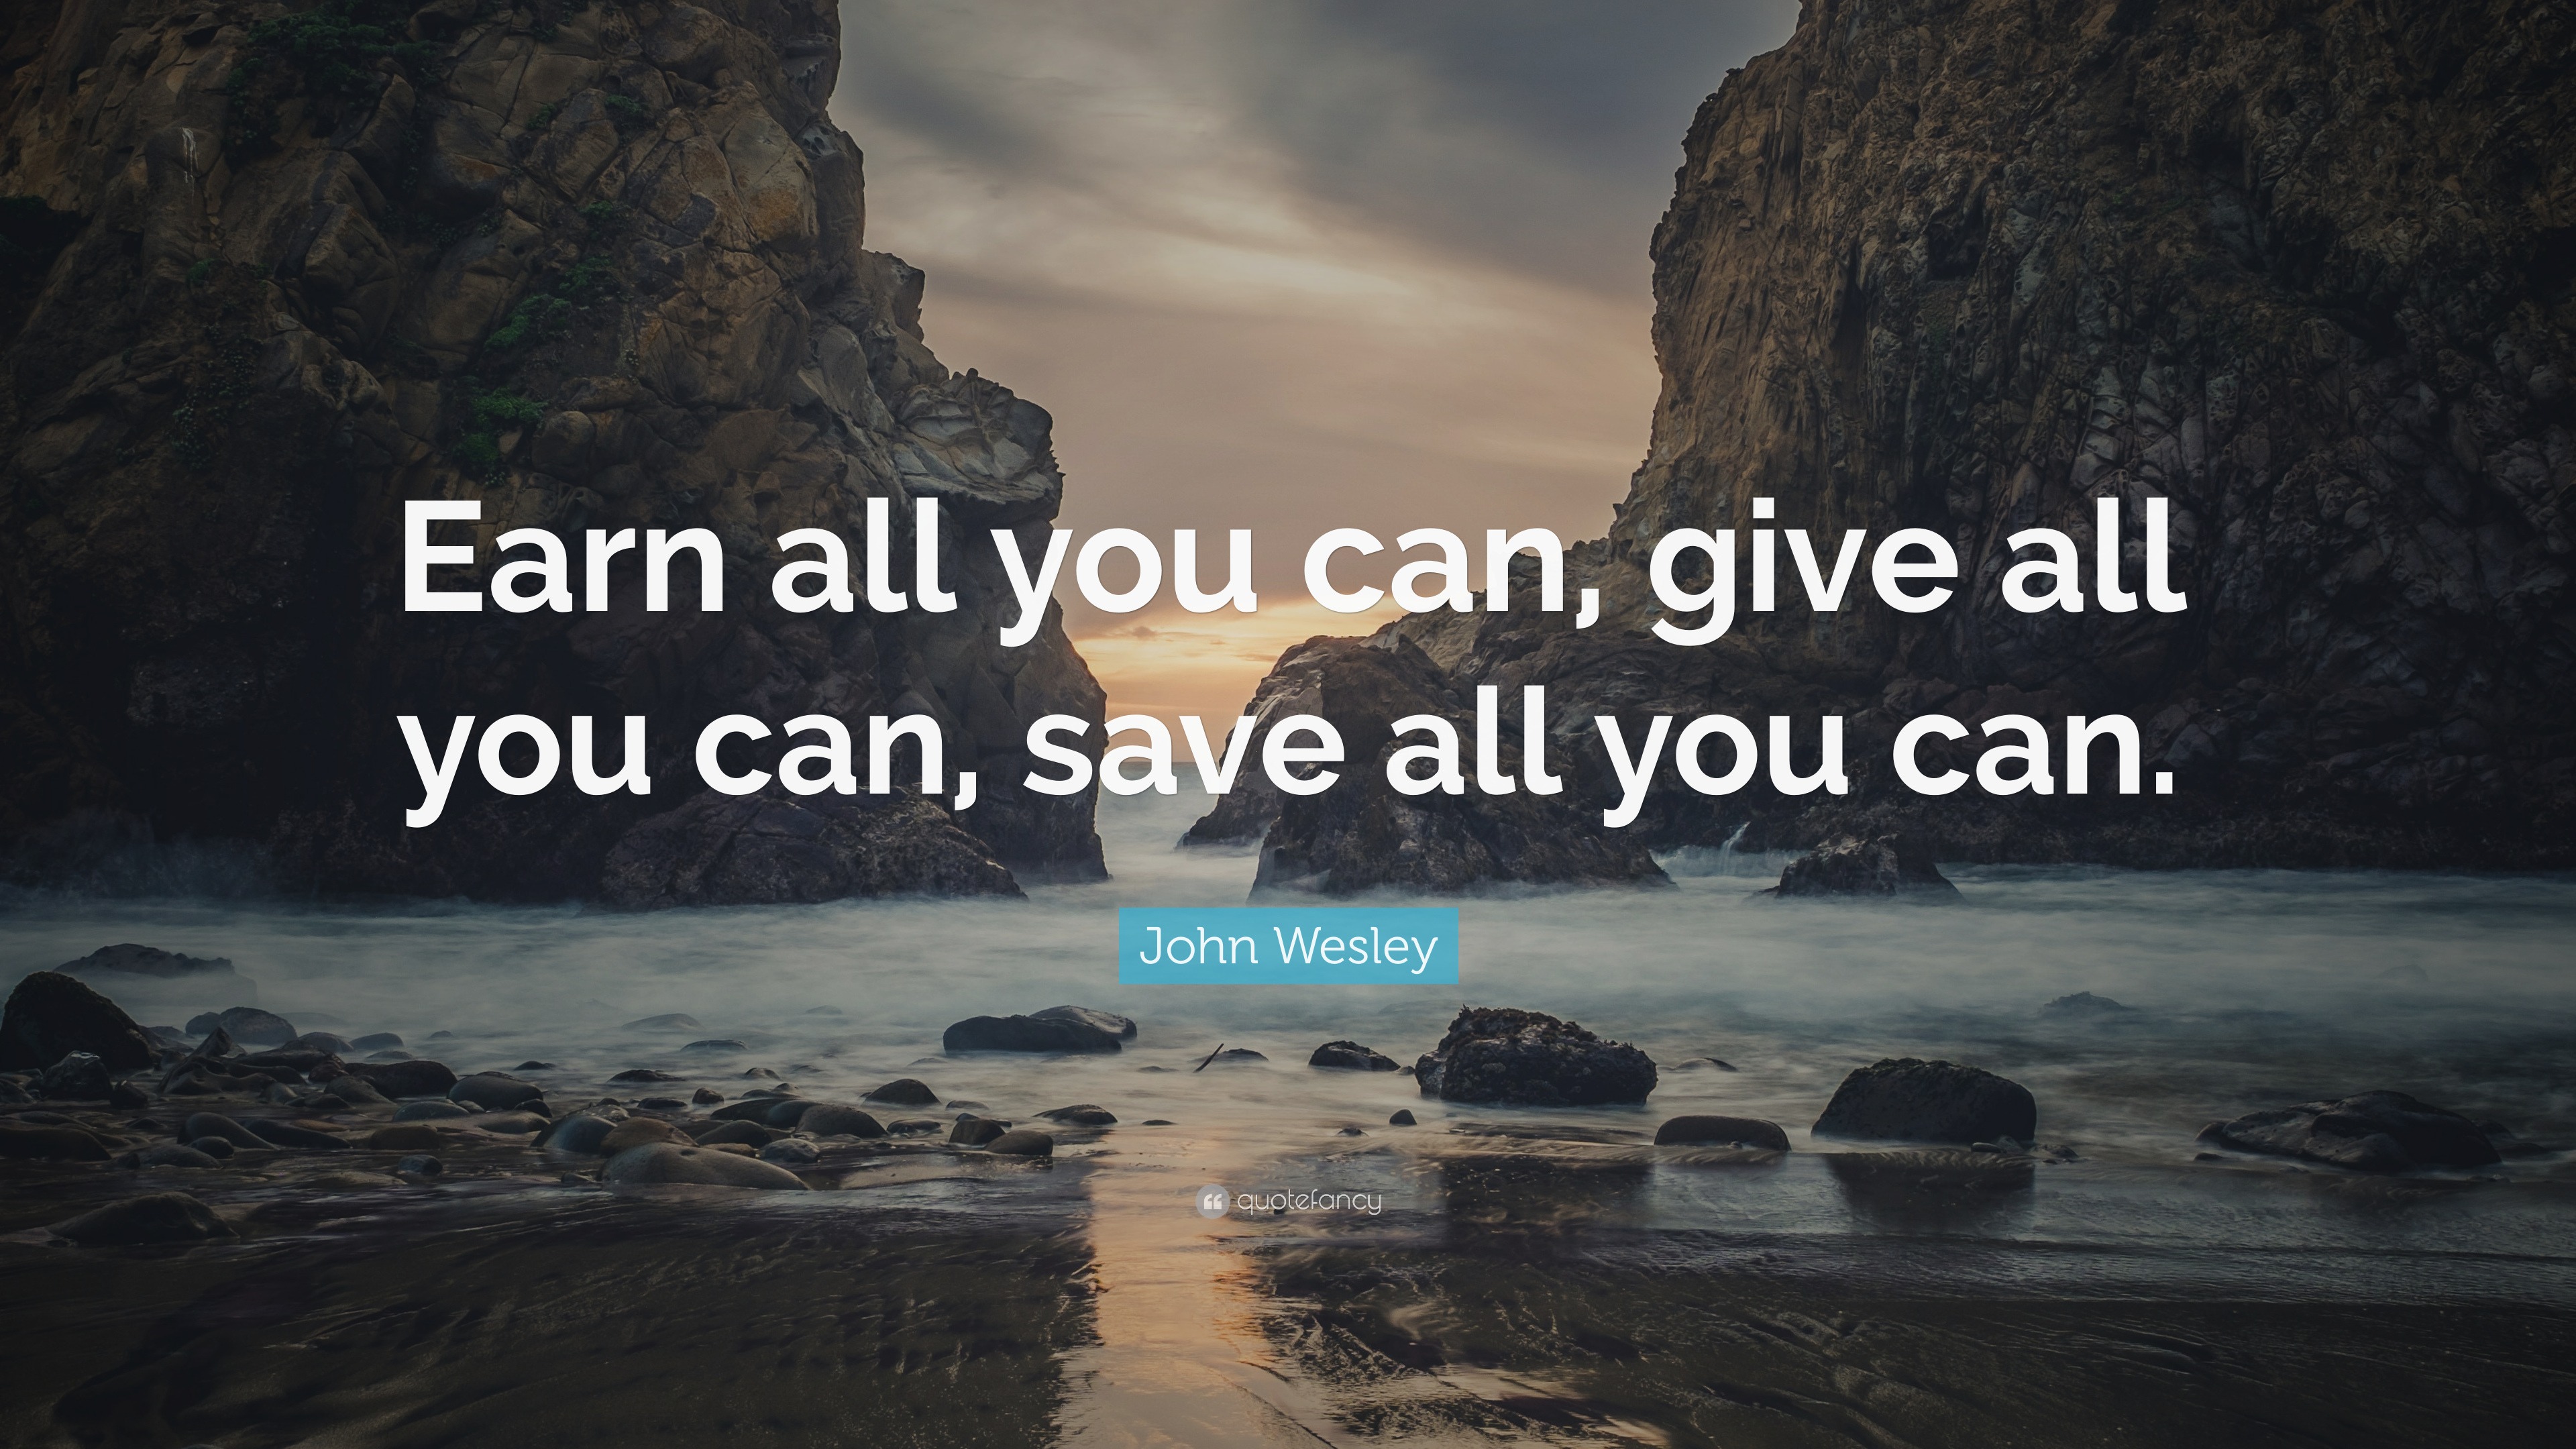 John Wesley Quote: “Earn all you can, give all you can, save all you can.”